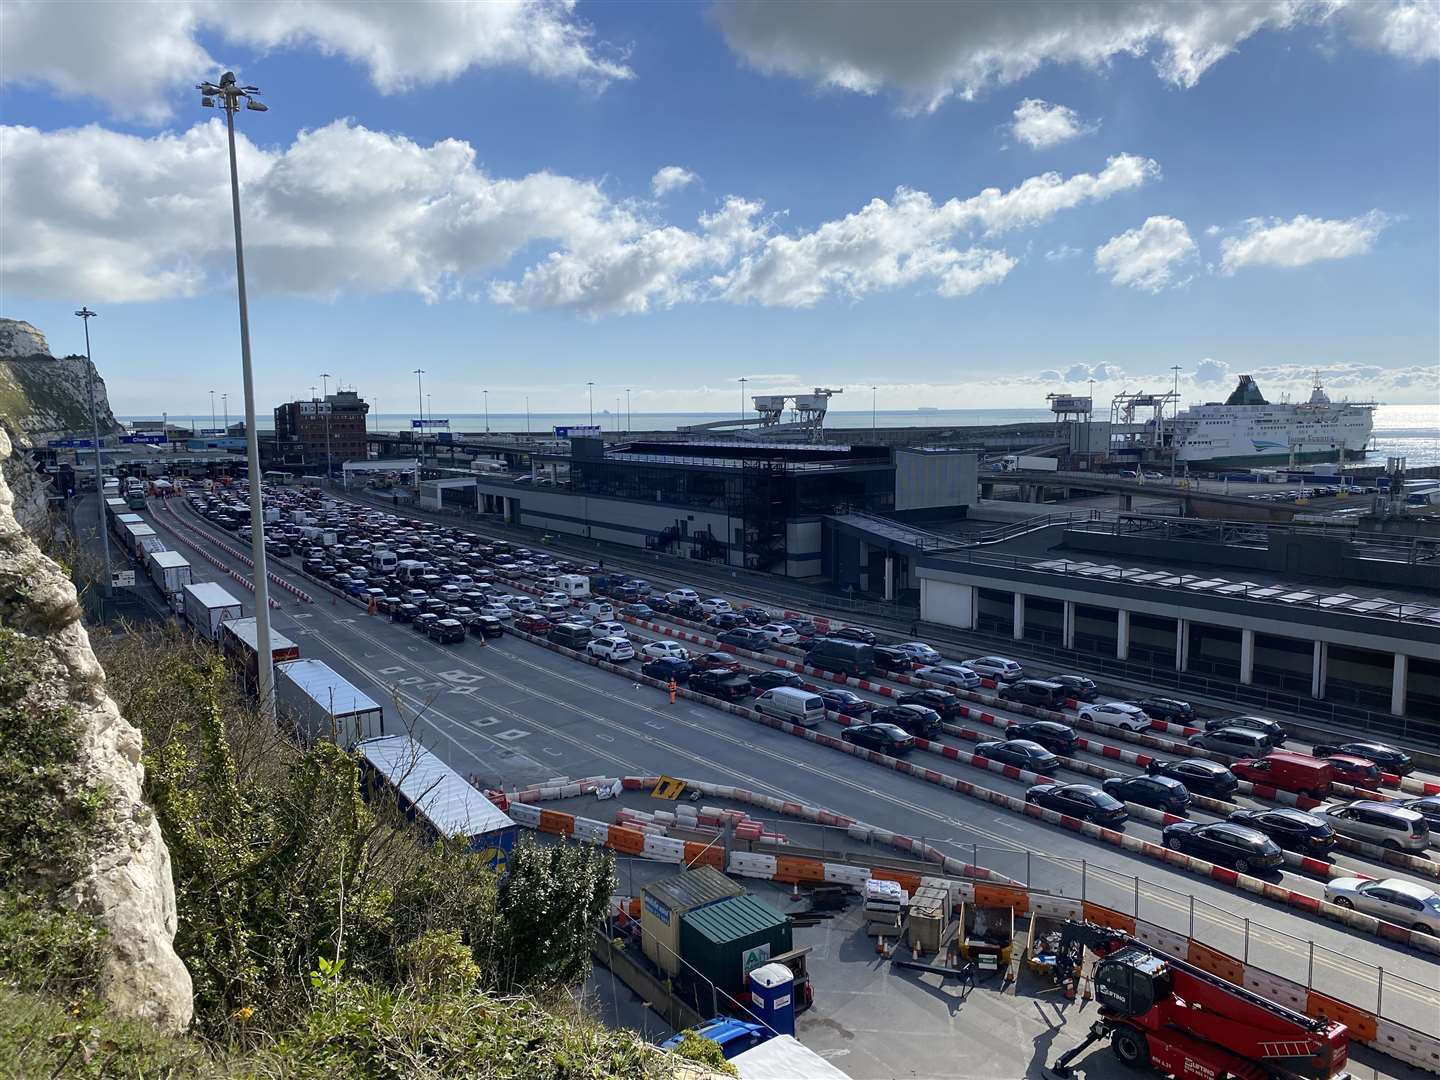 There are long queues at the Port of Dover